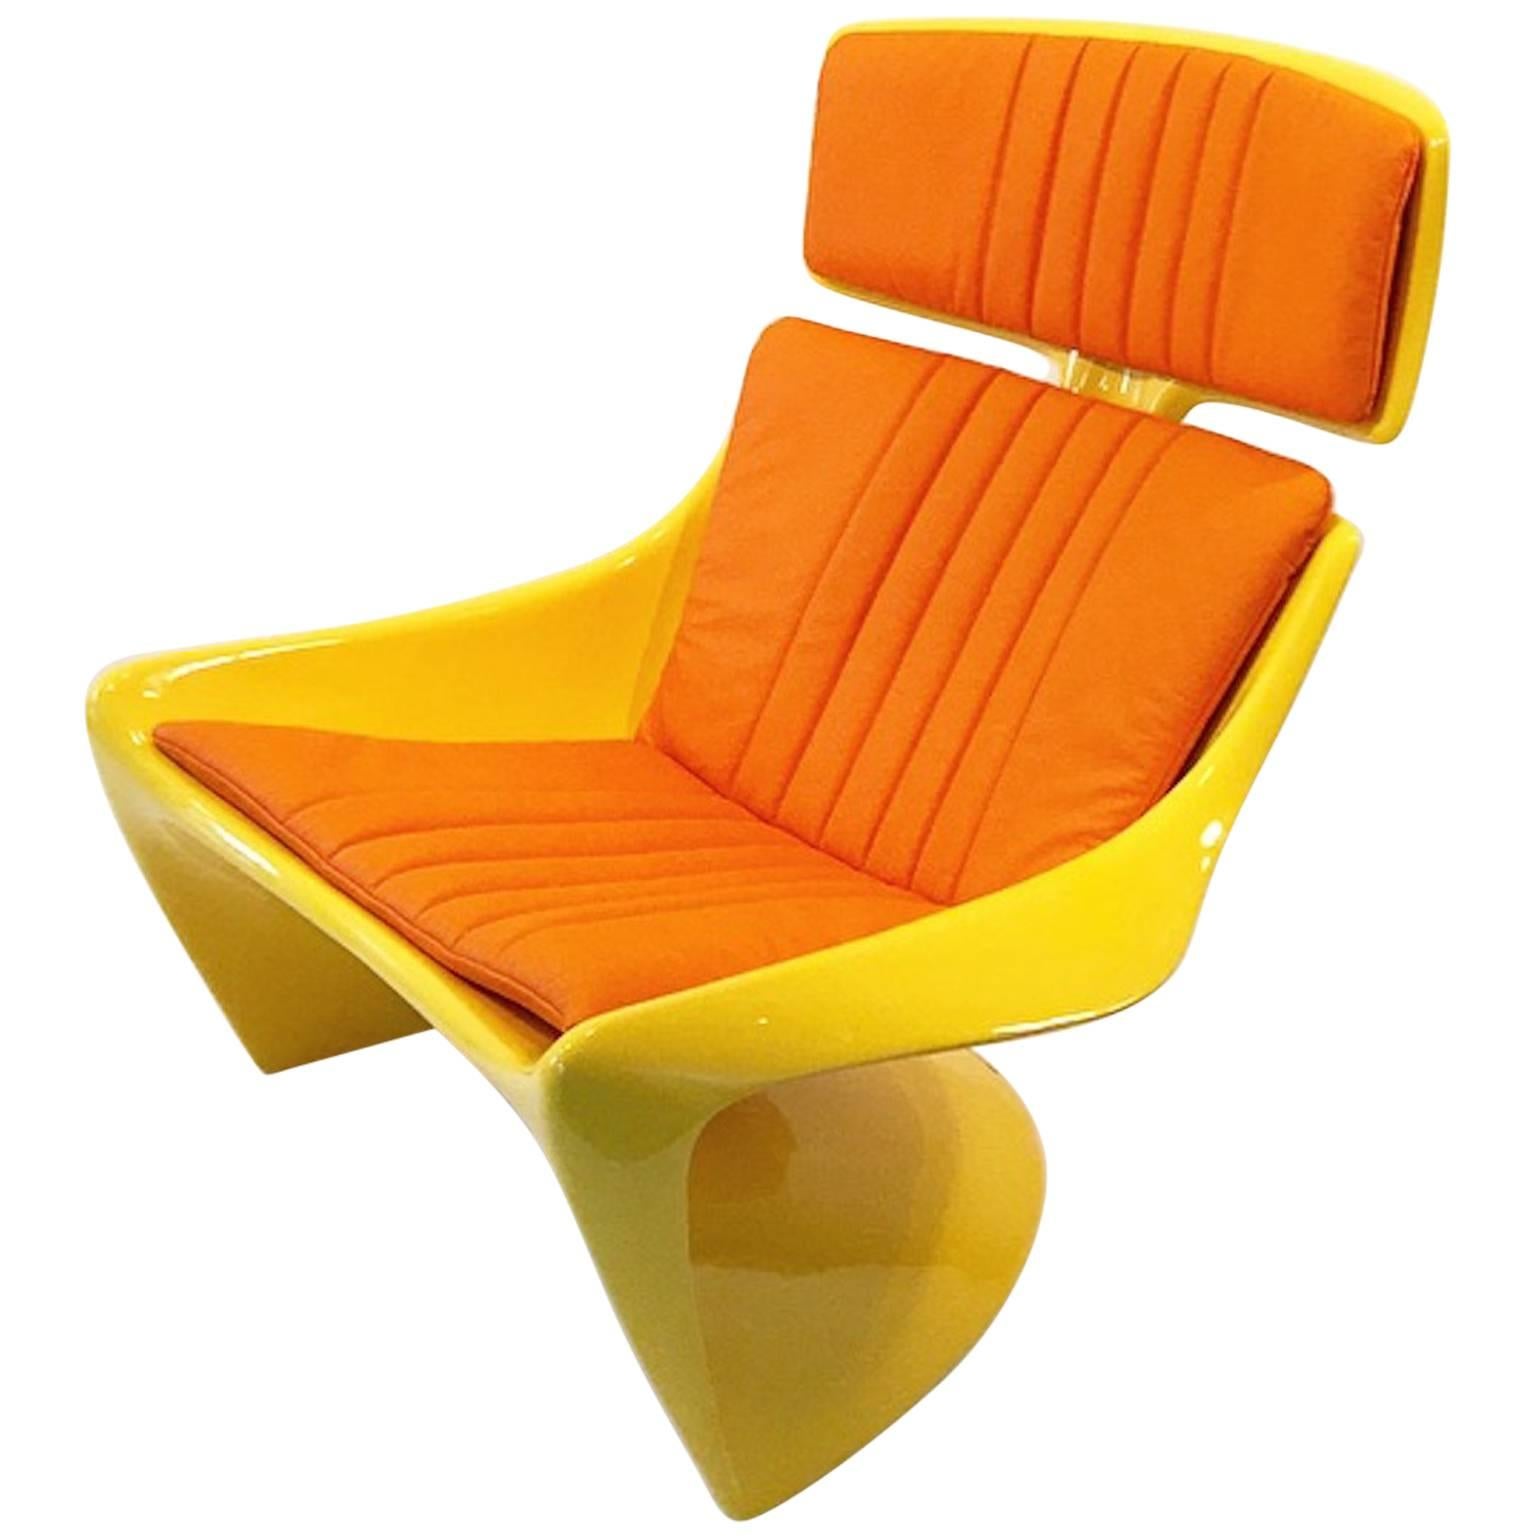 Unique Danish Prototype Lounge Chair by Steen Ostergaard